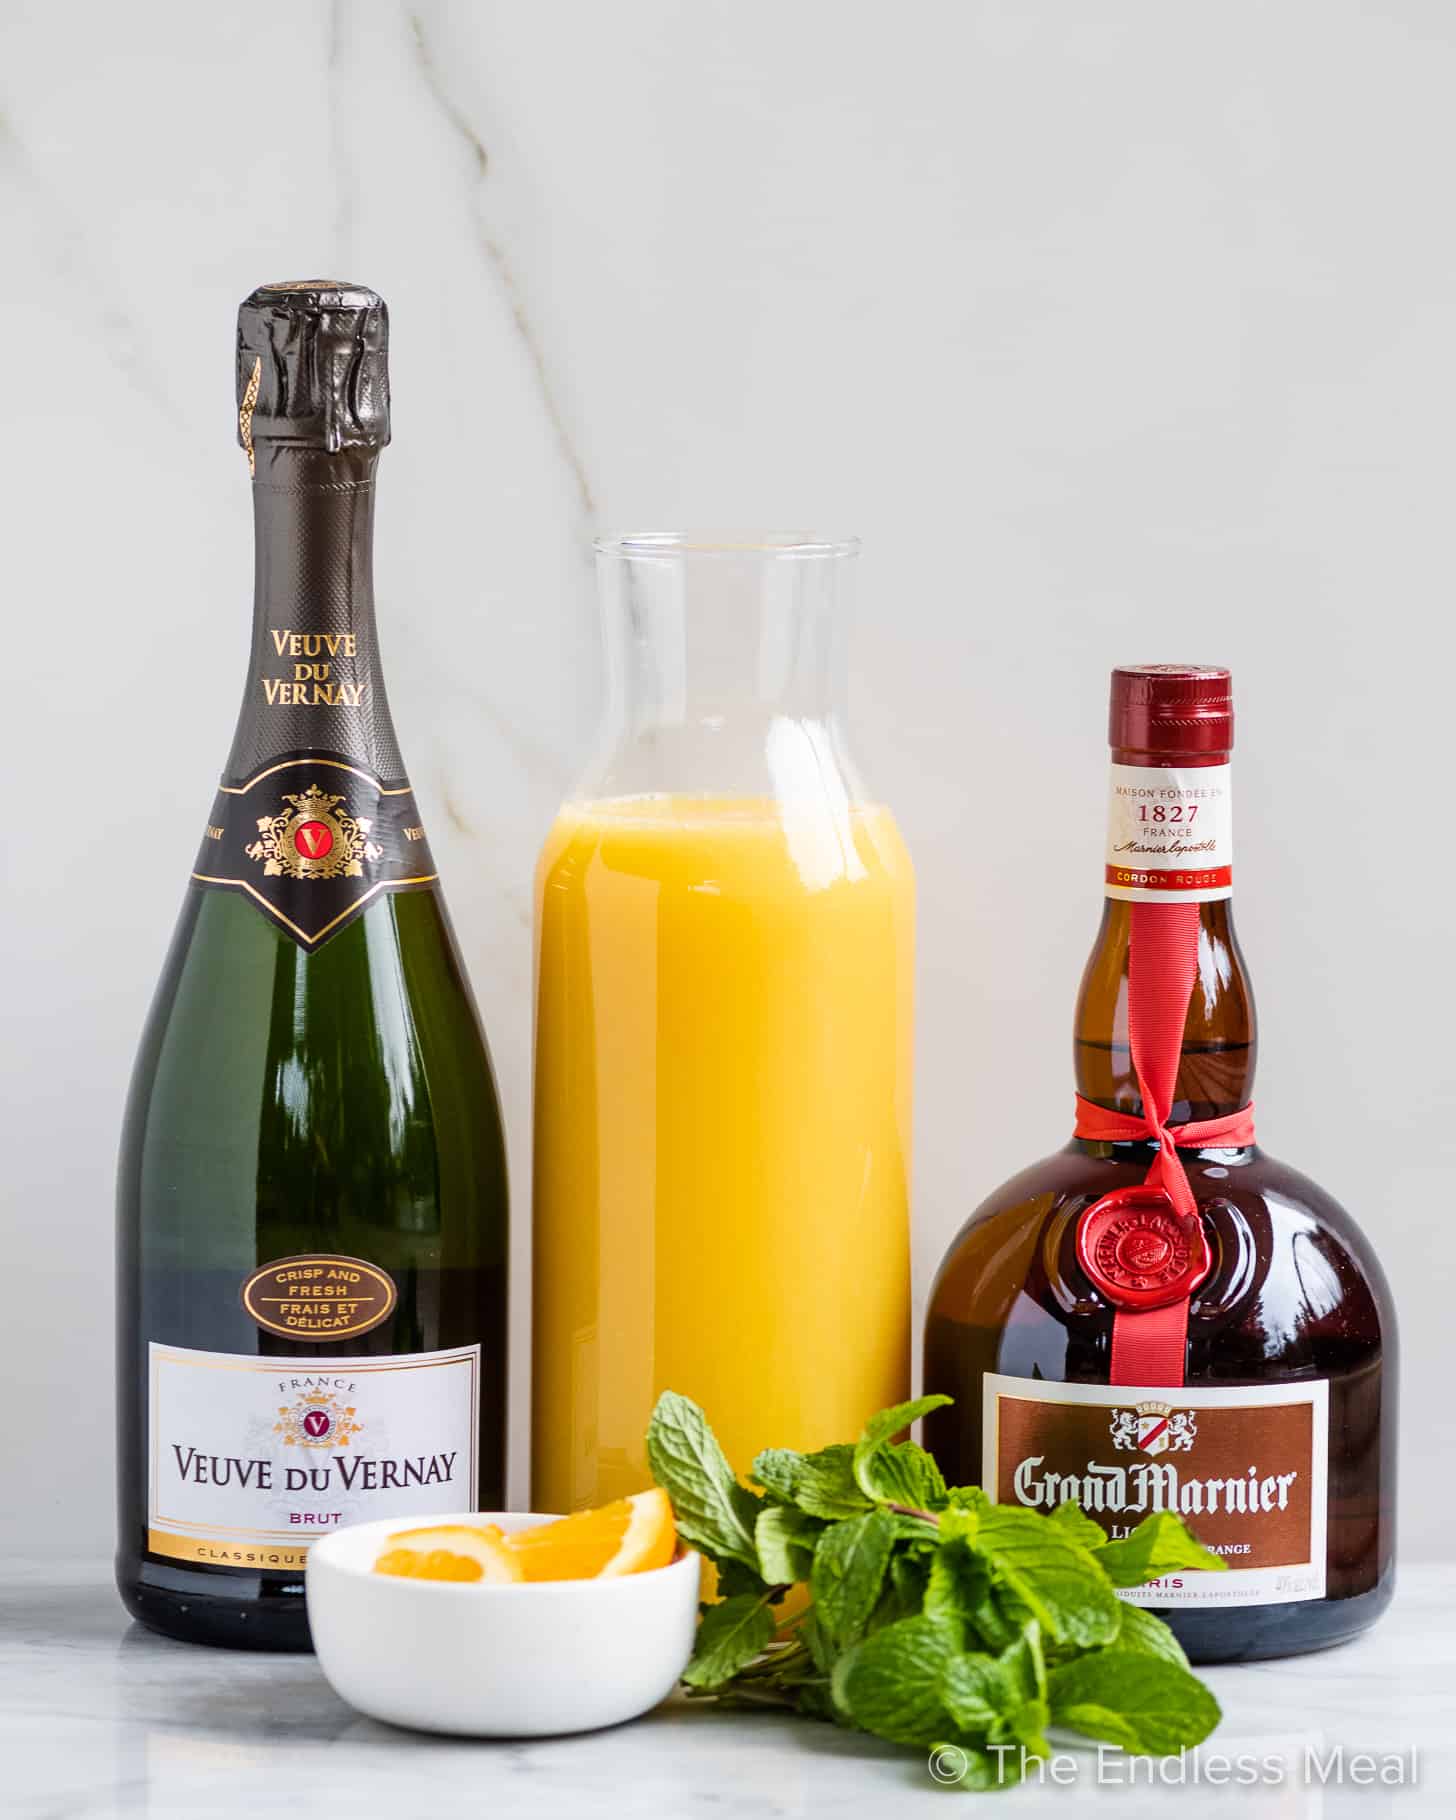 The ingredients to make this mimosa recipe.